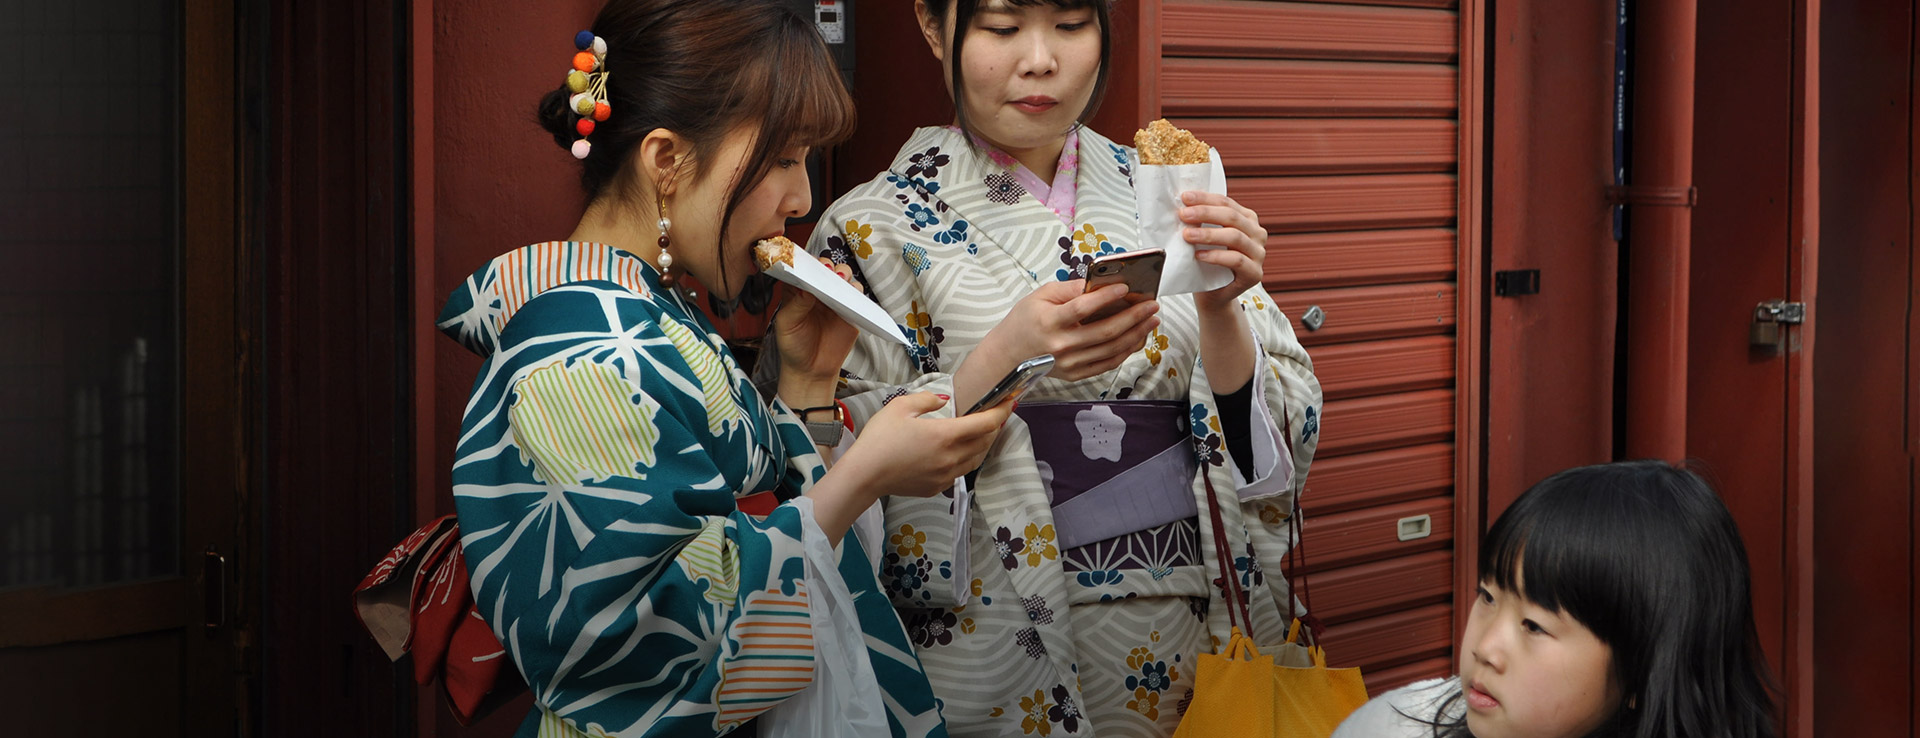 Two Japanese women in traditional dress with a young girl